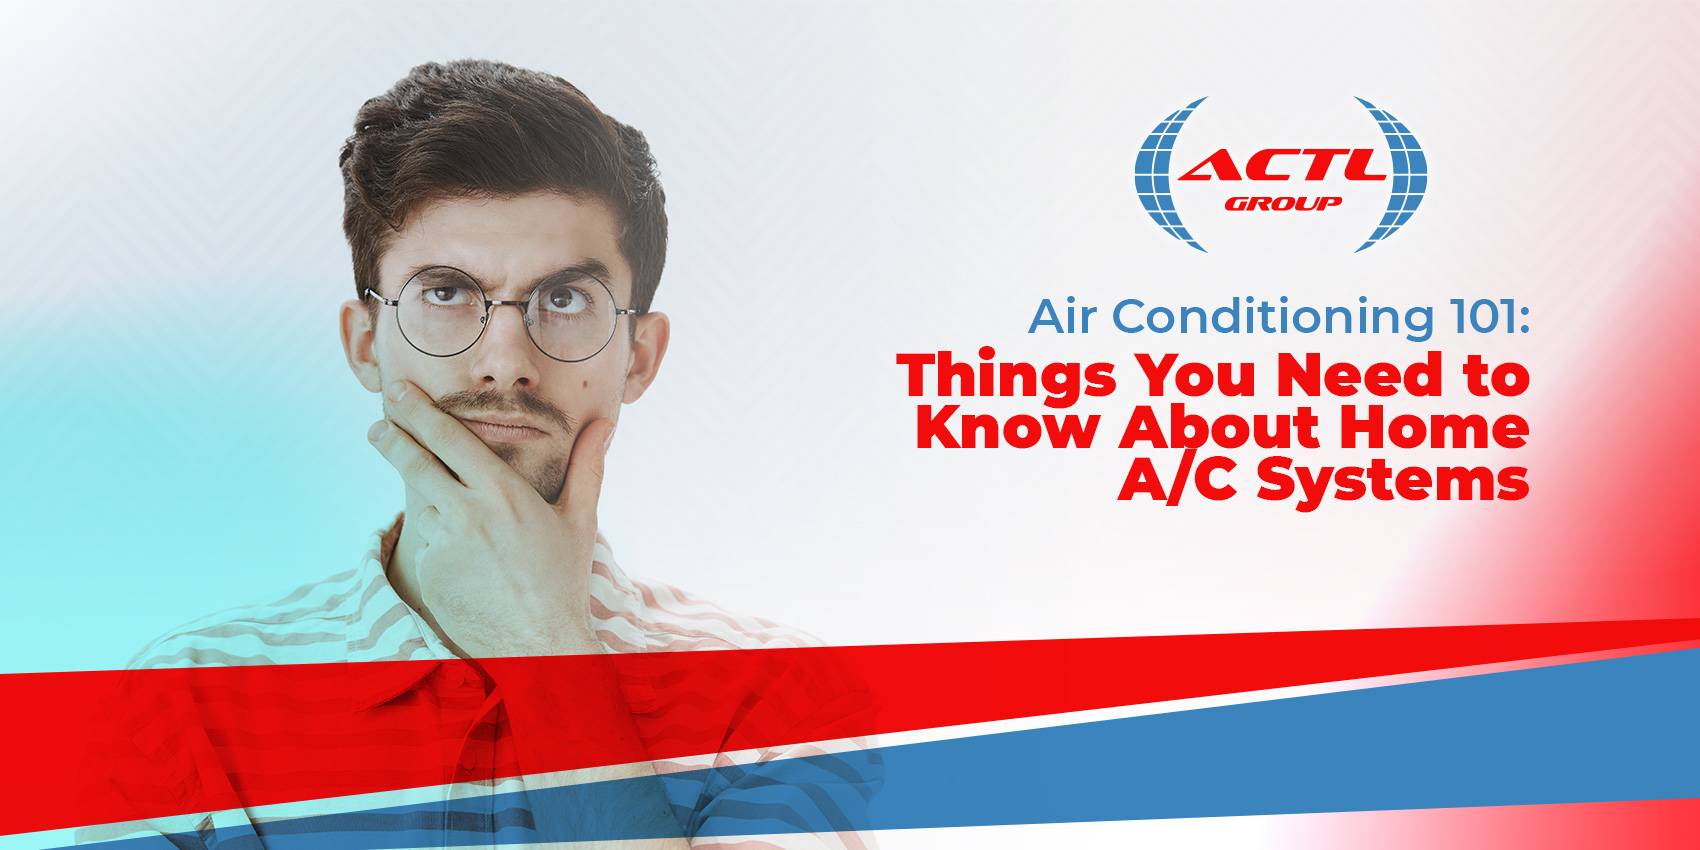 Air Conditioning 101: Things You Need to Know About Home A/C Systems